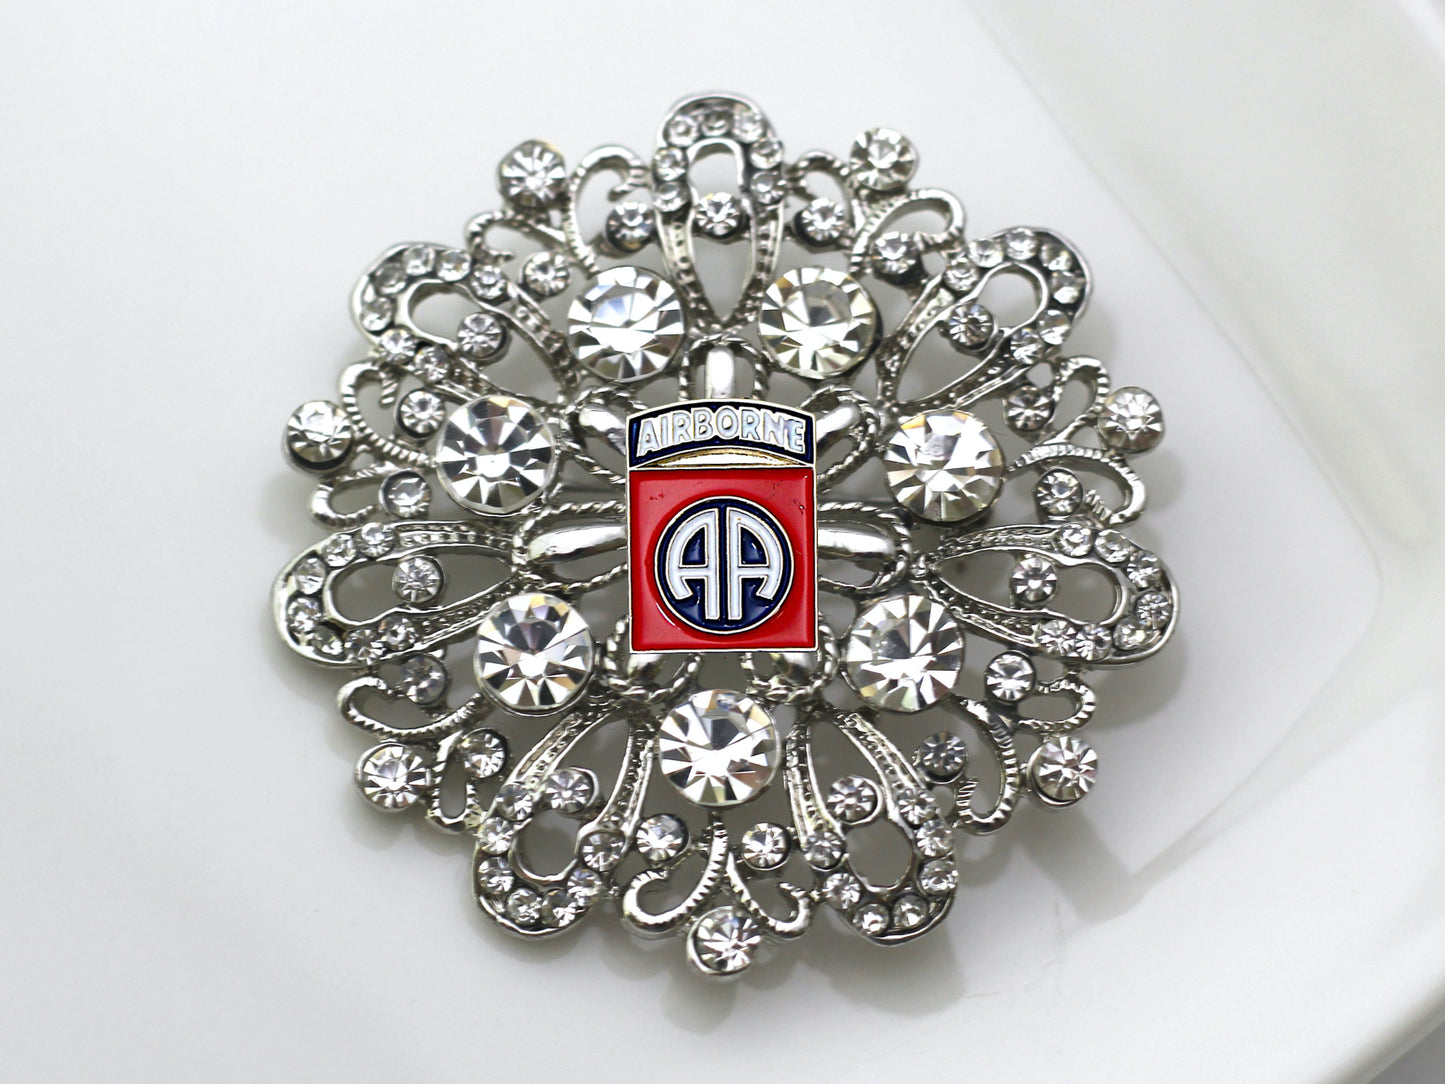 82nd Airborne Division Brooch